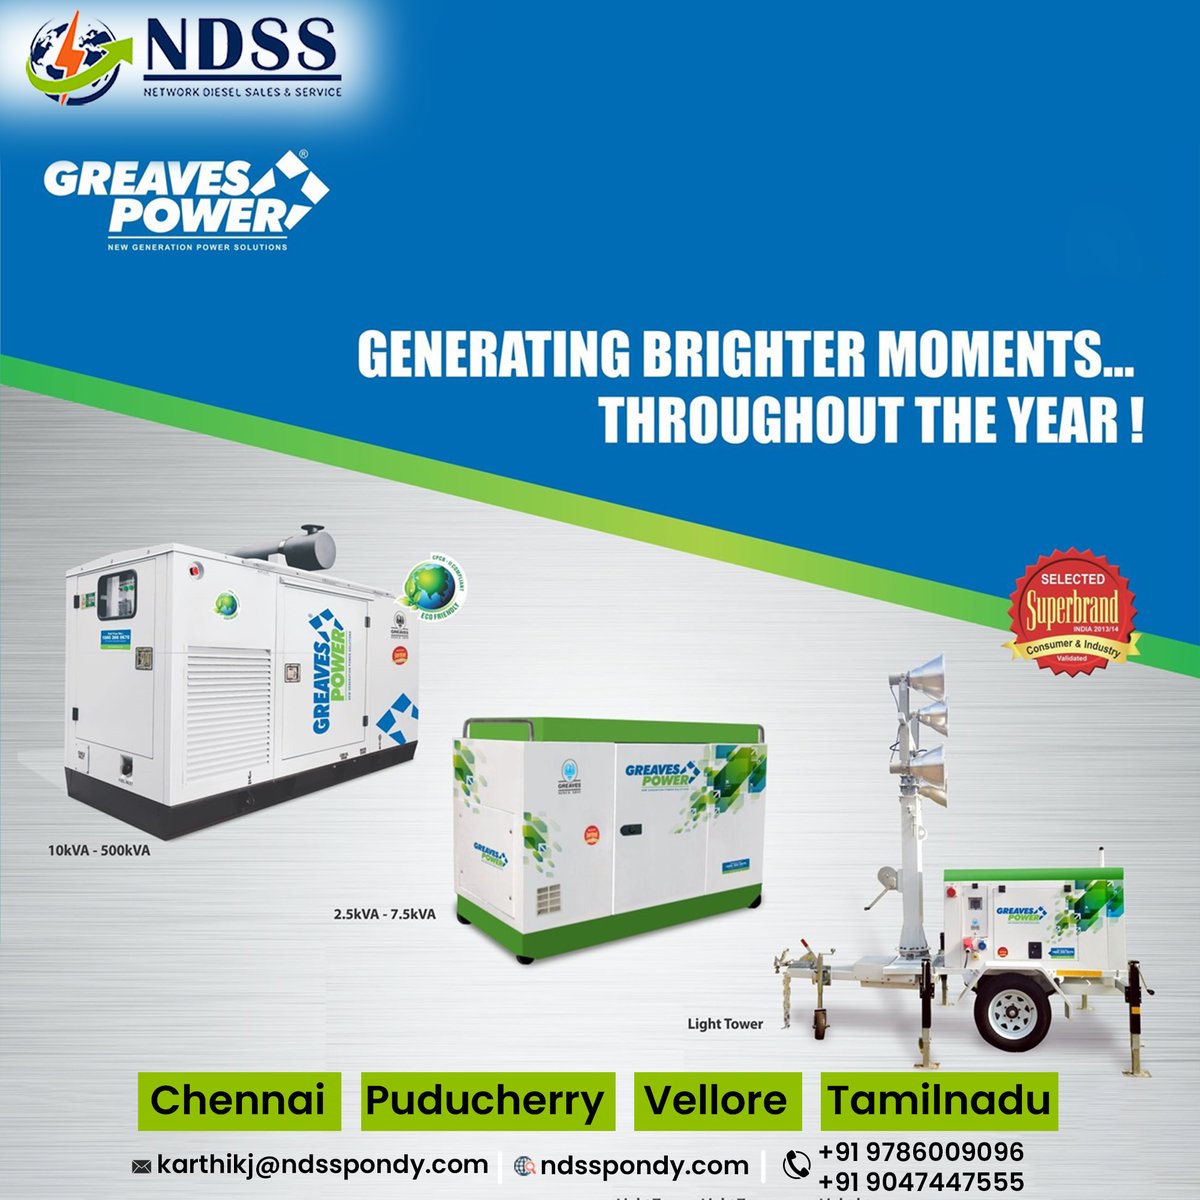 Keep the lights on all year round with reliable power solutions from NDSS and Greaves Power! We offer a wide range of generators from 2.5kVA to 500kVA. #NETWORKDIESELSALESANDSERVICES #GreavesPower #PowerSolutions #TamilNadu